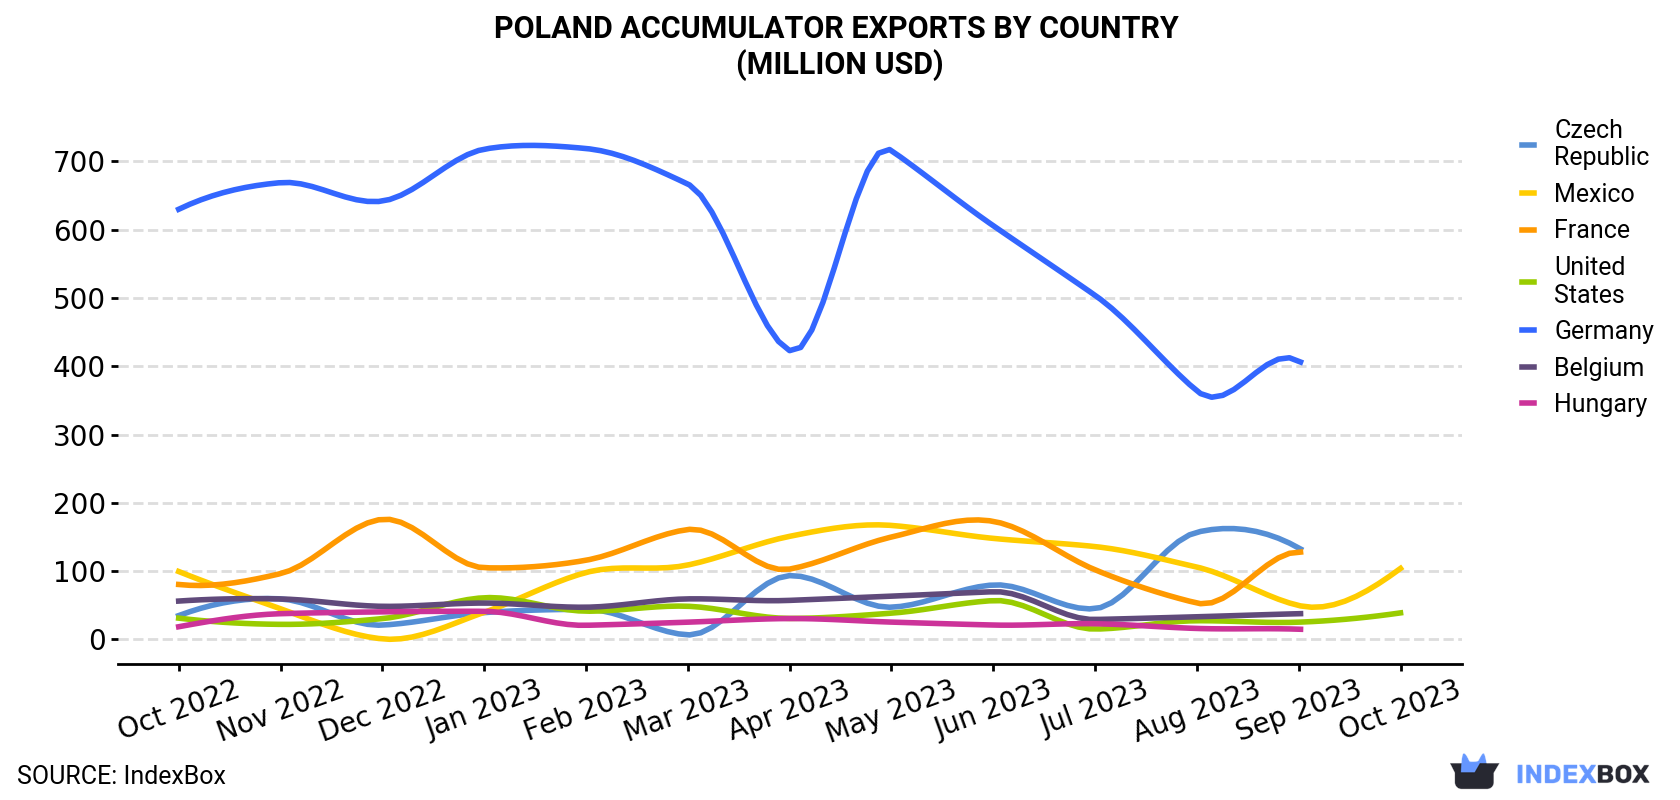 Poland Accumulator Exports By Country (Million USD)